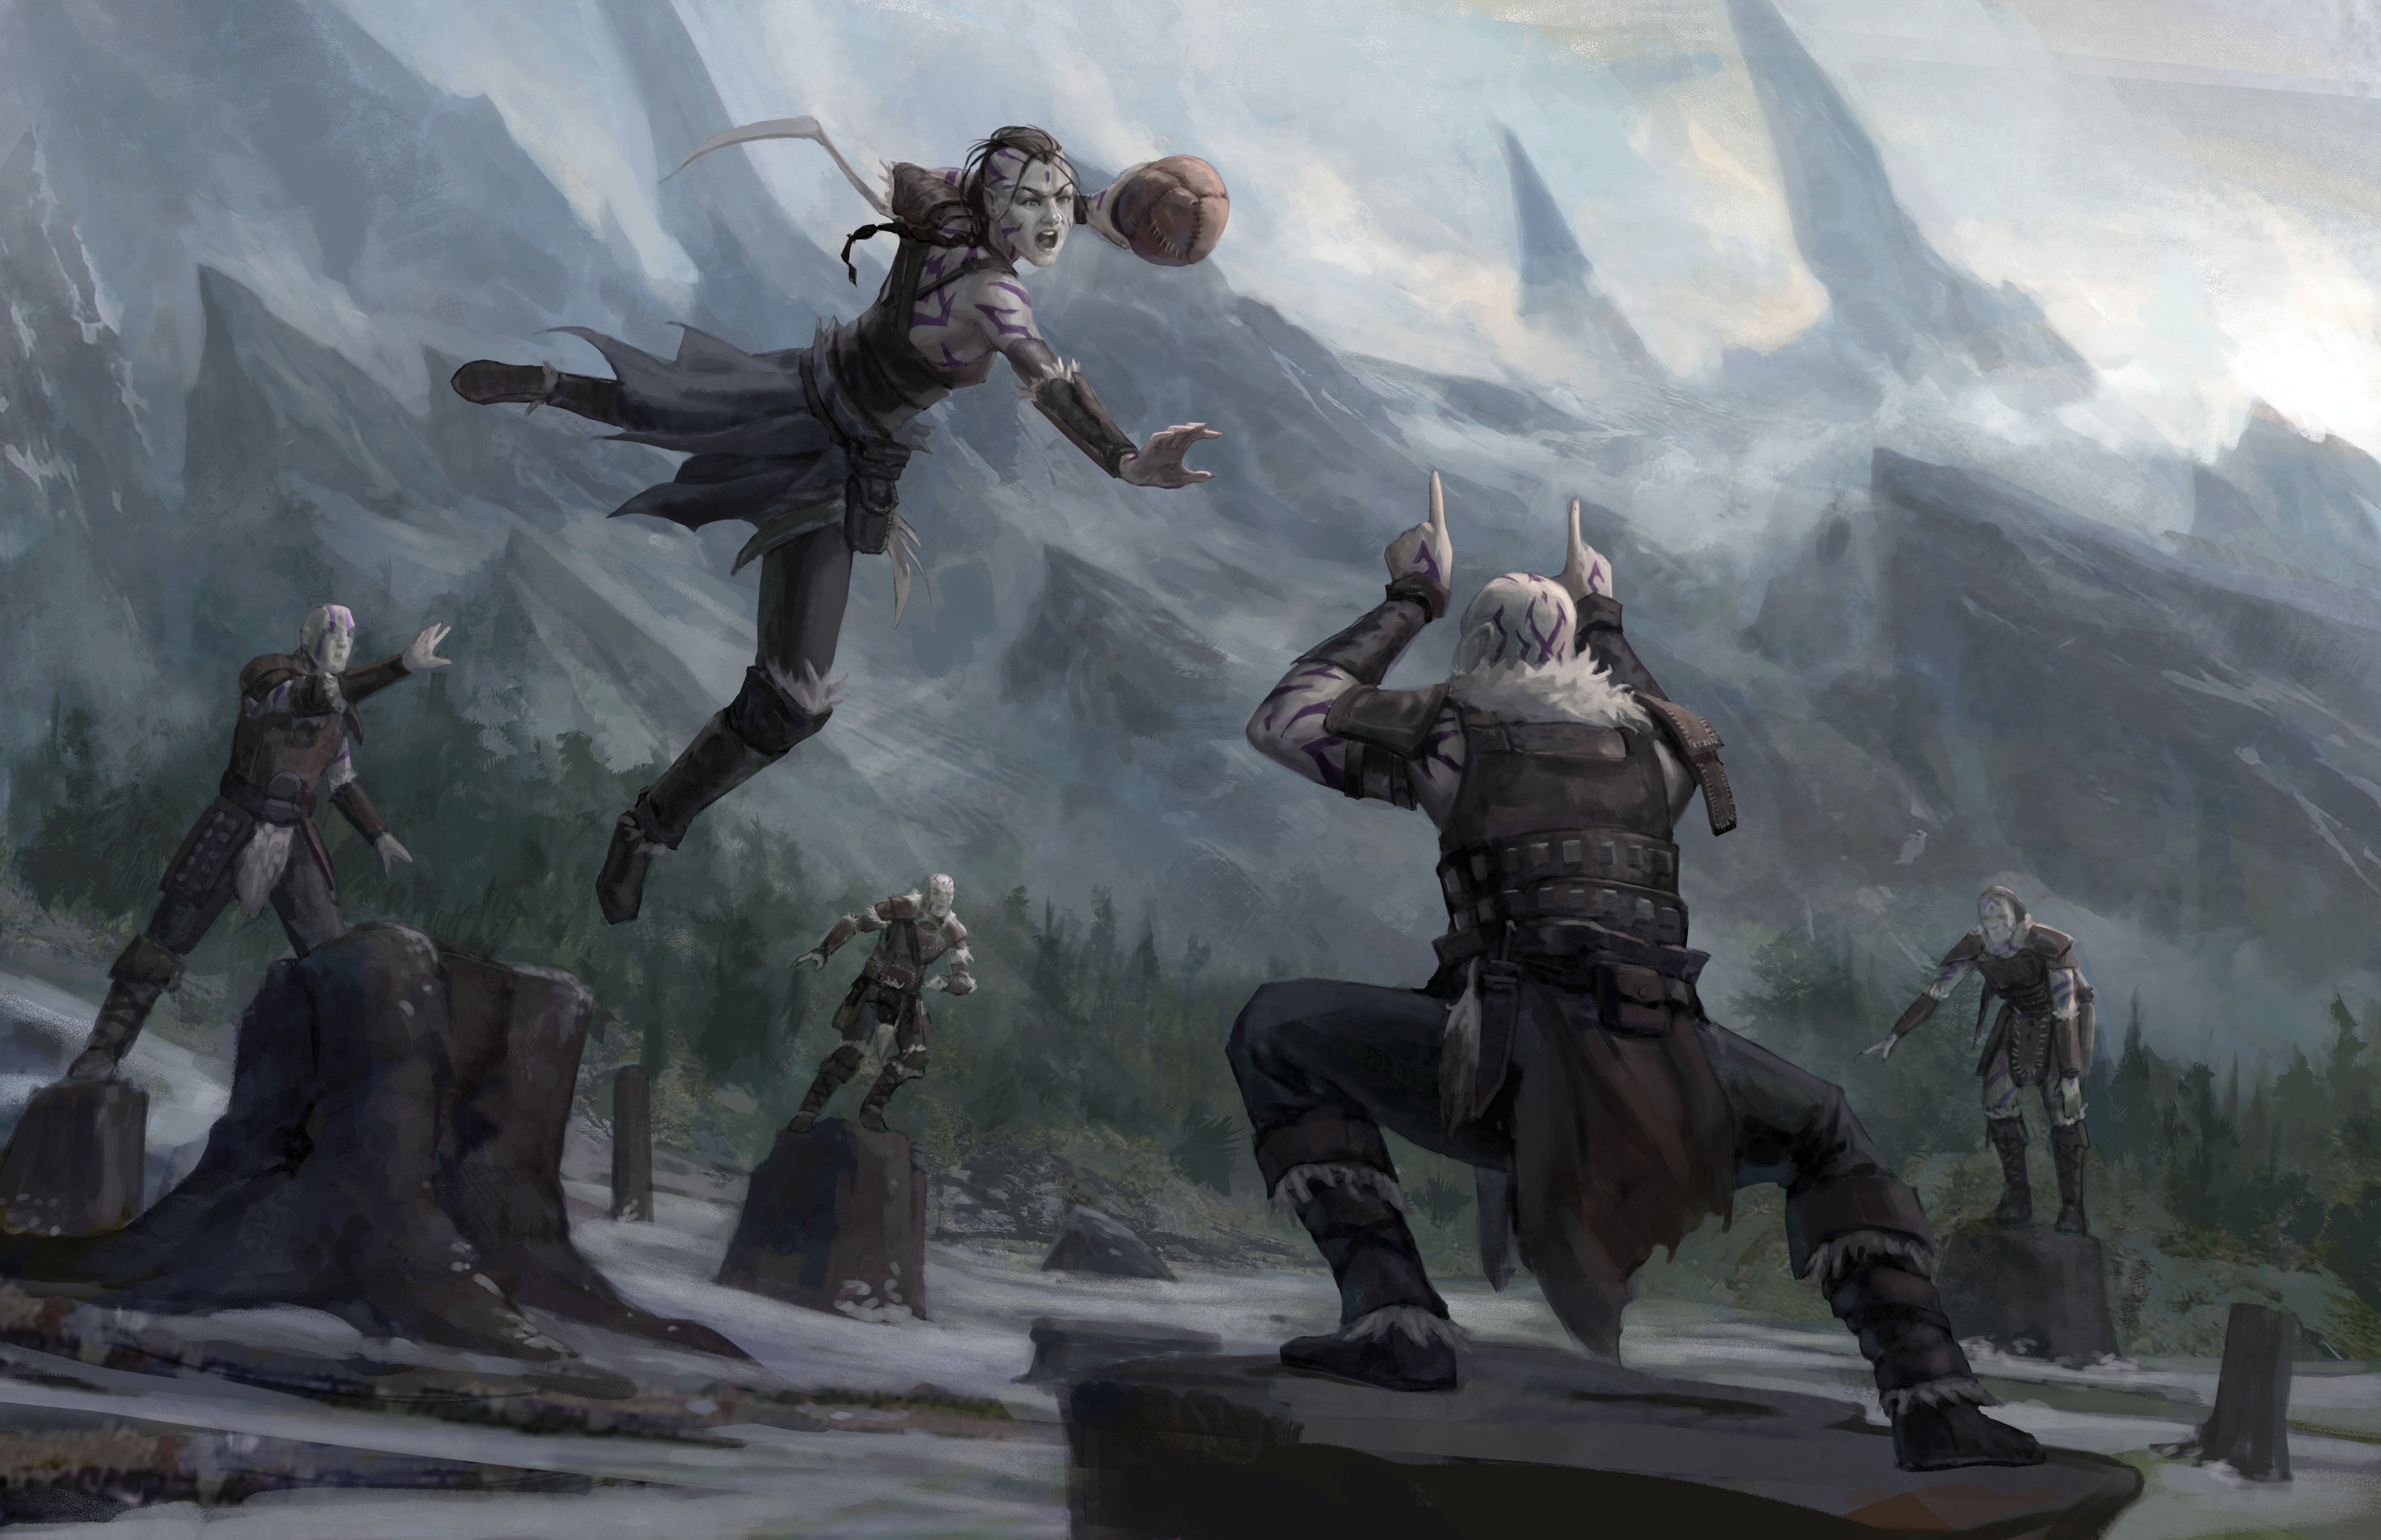 GOATBALL! - Icewind Dale: Rime of the Frost Maiden by Sam Keiser